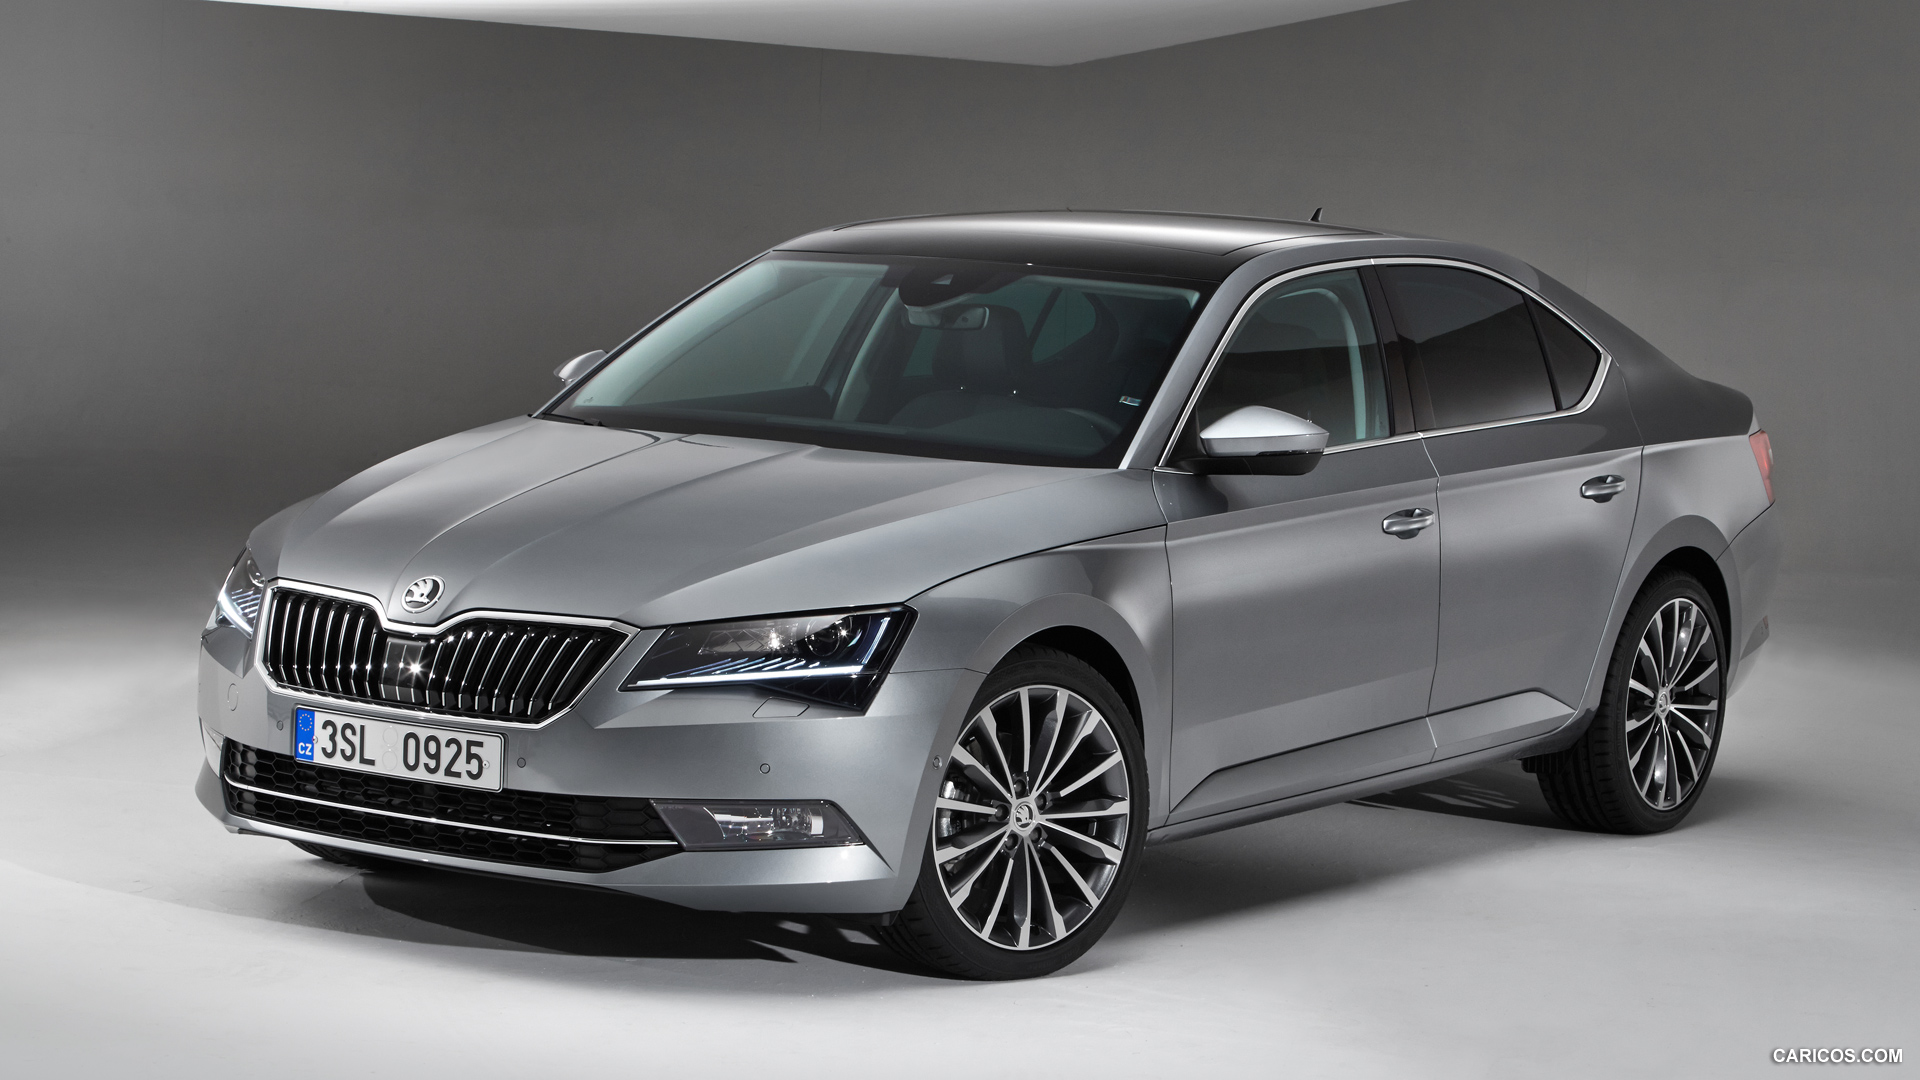 New Skoda Superb Launched in India @ INR 22.68 lakhs